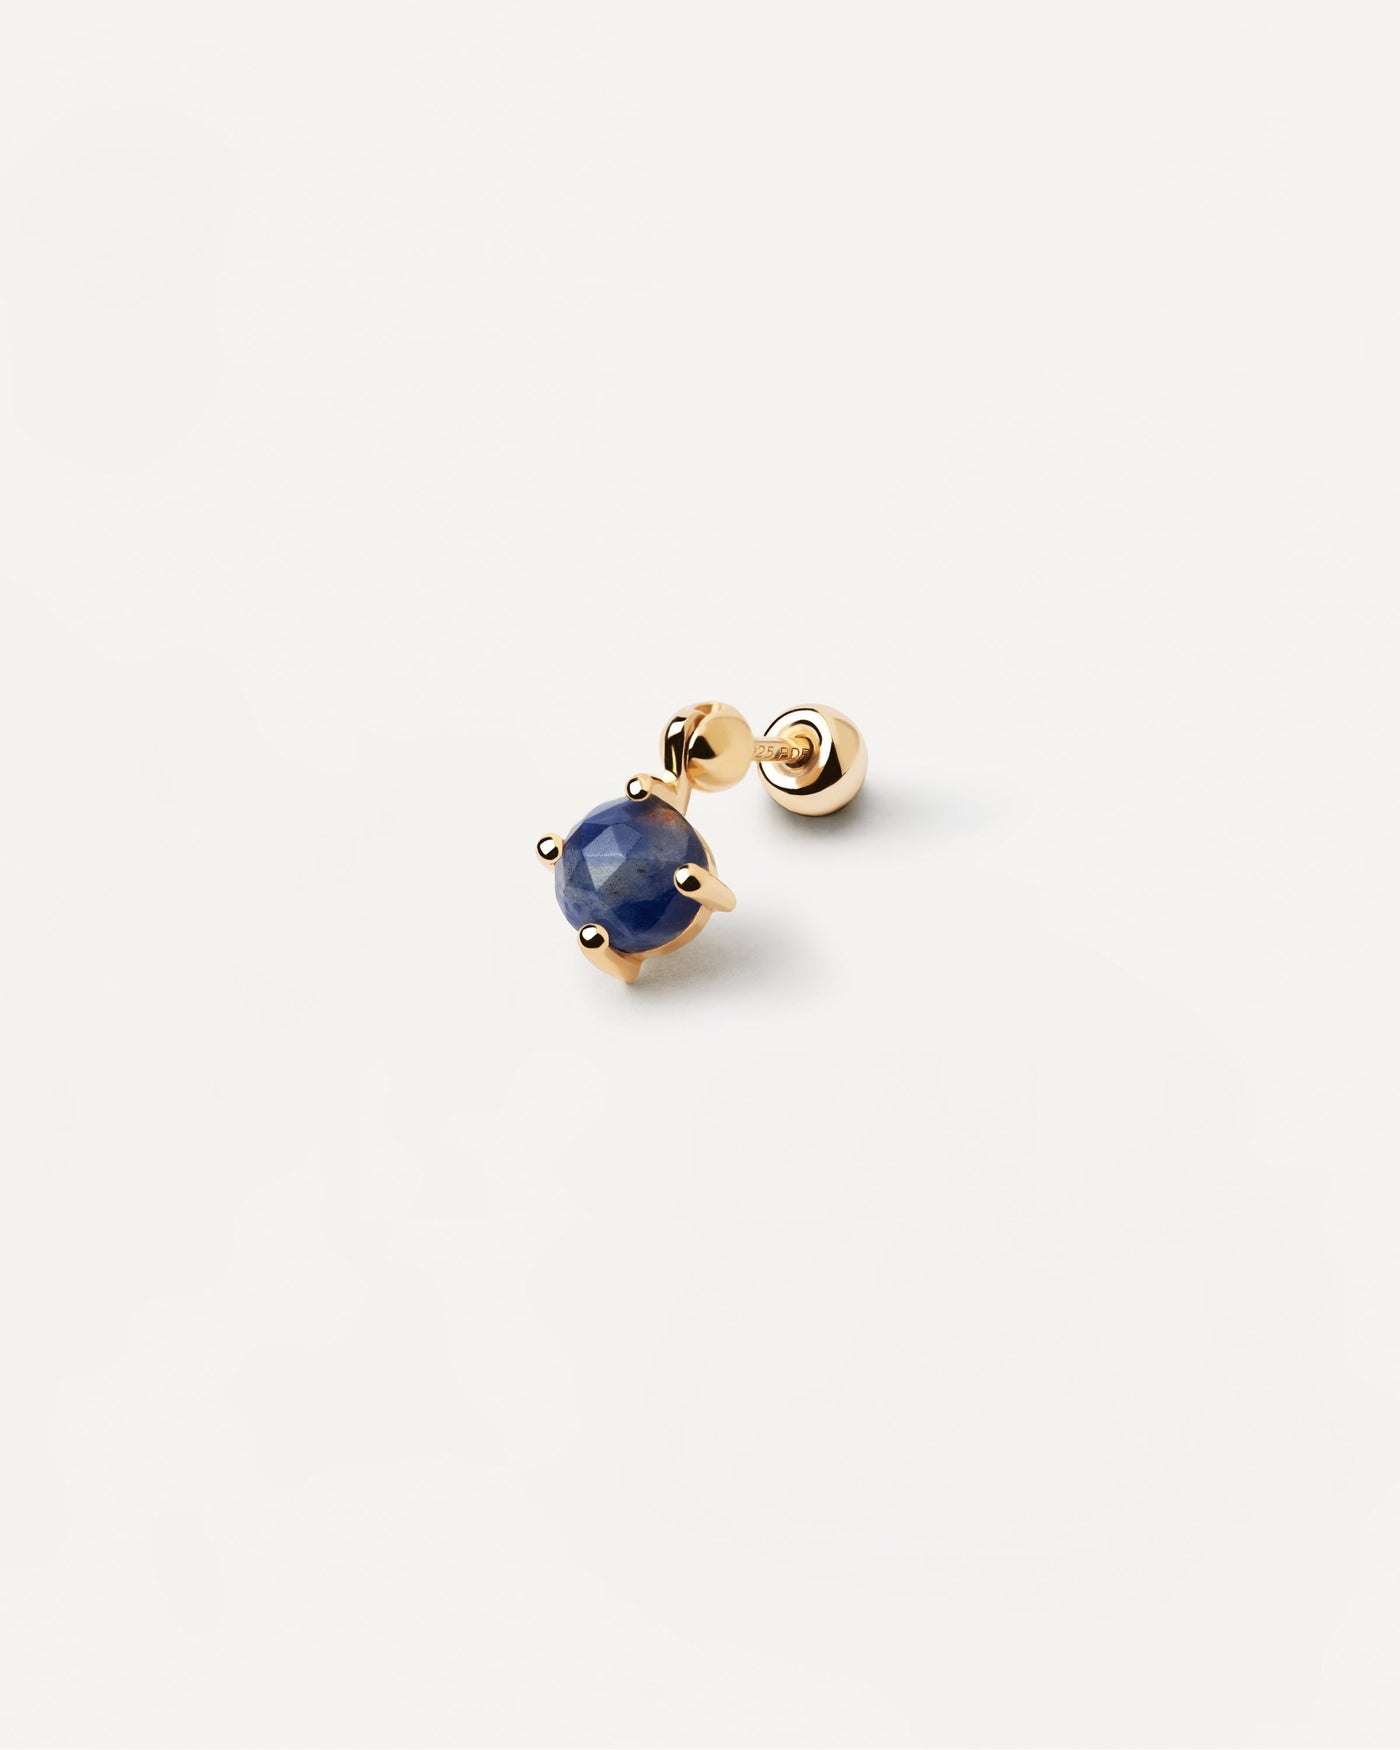 2023 Selection | Kimi Sodalite Single Earring. Gold-plated ear piercing with dark blue gemstone pendant in round cut. Get the latest arrival from PDPAOLA. Place your order safely and get this Best Seller. Free Shipping.